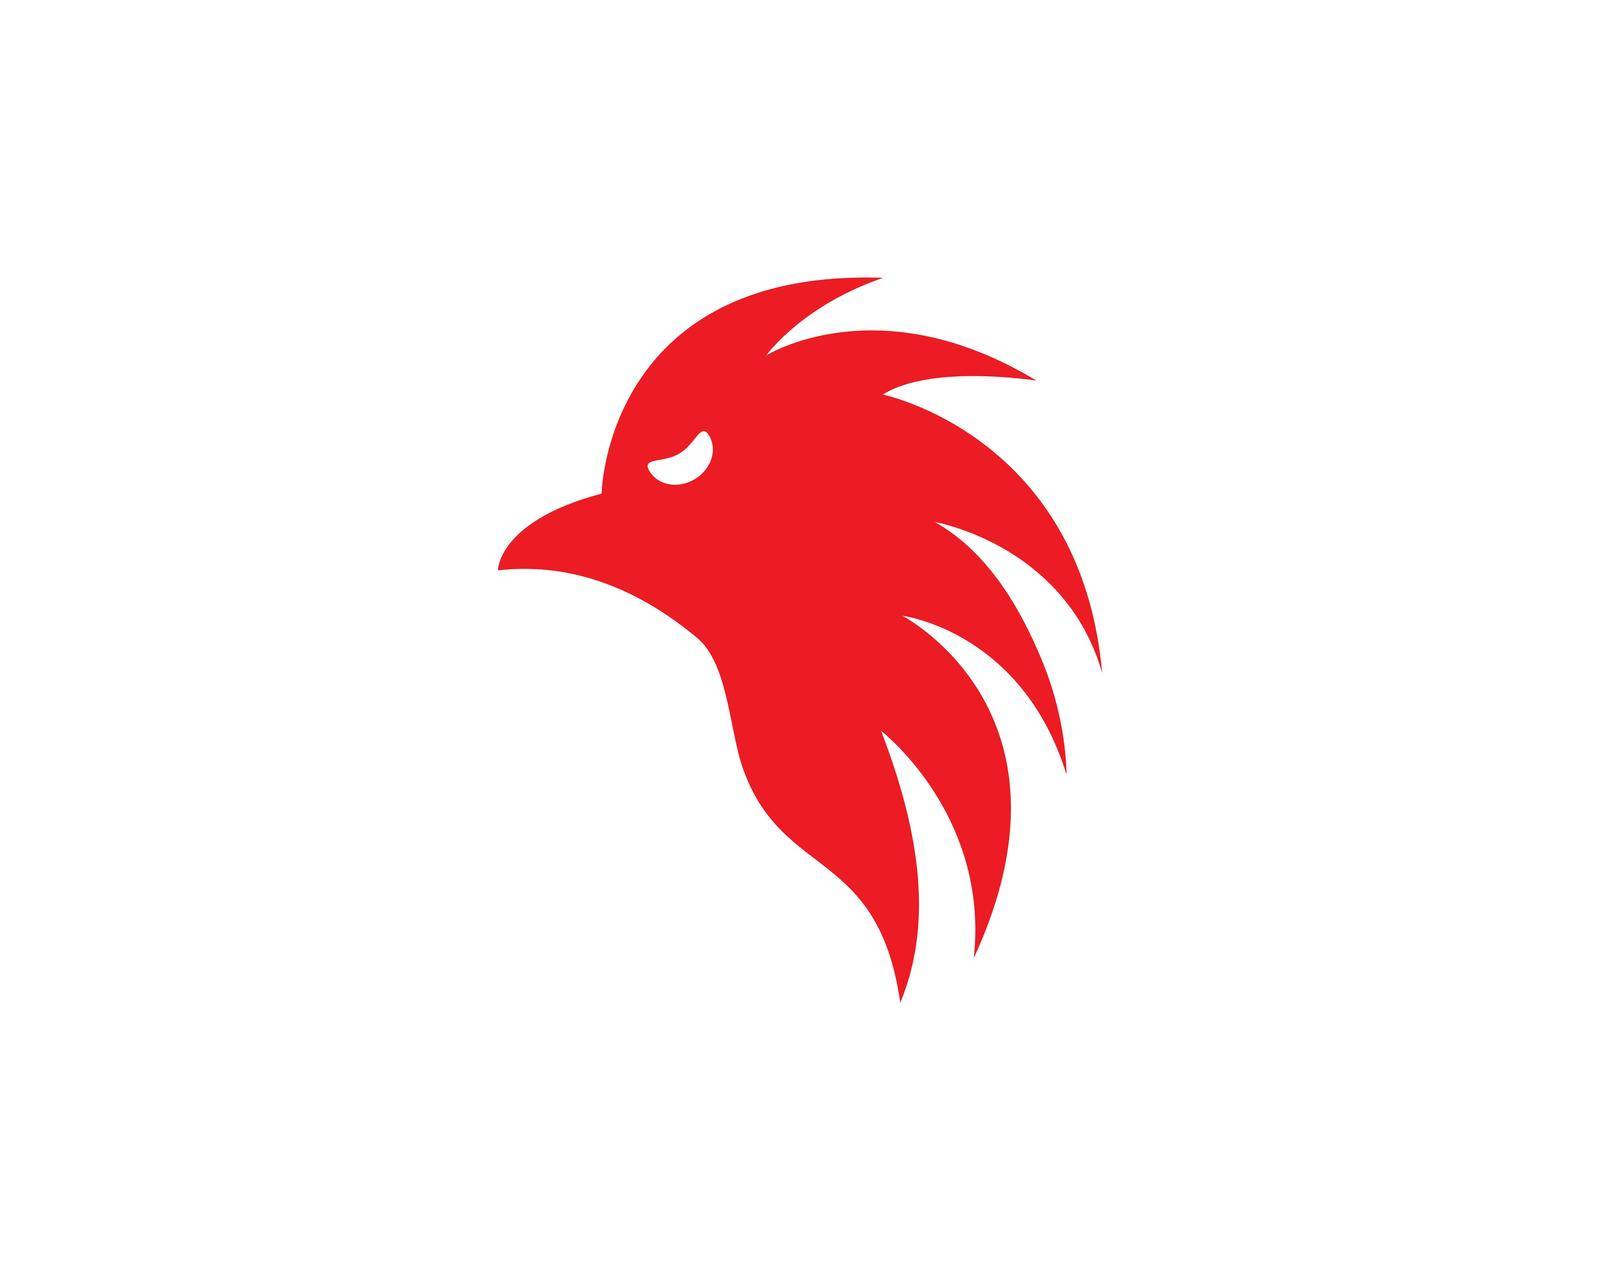 Rooster vector icon illustration design by Fat17